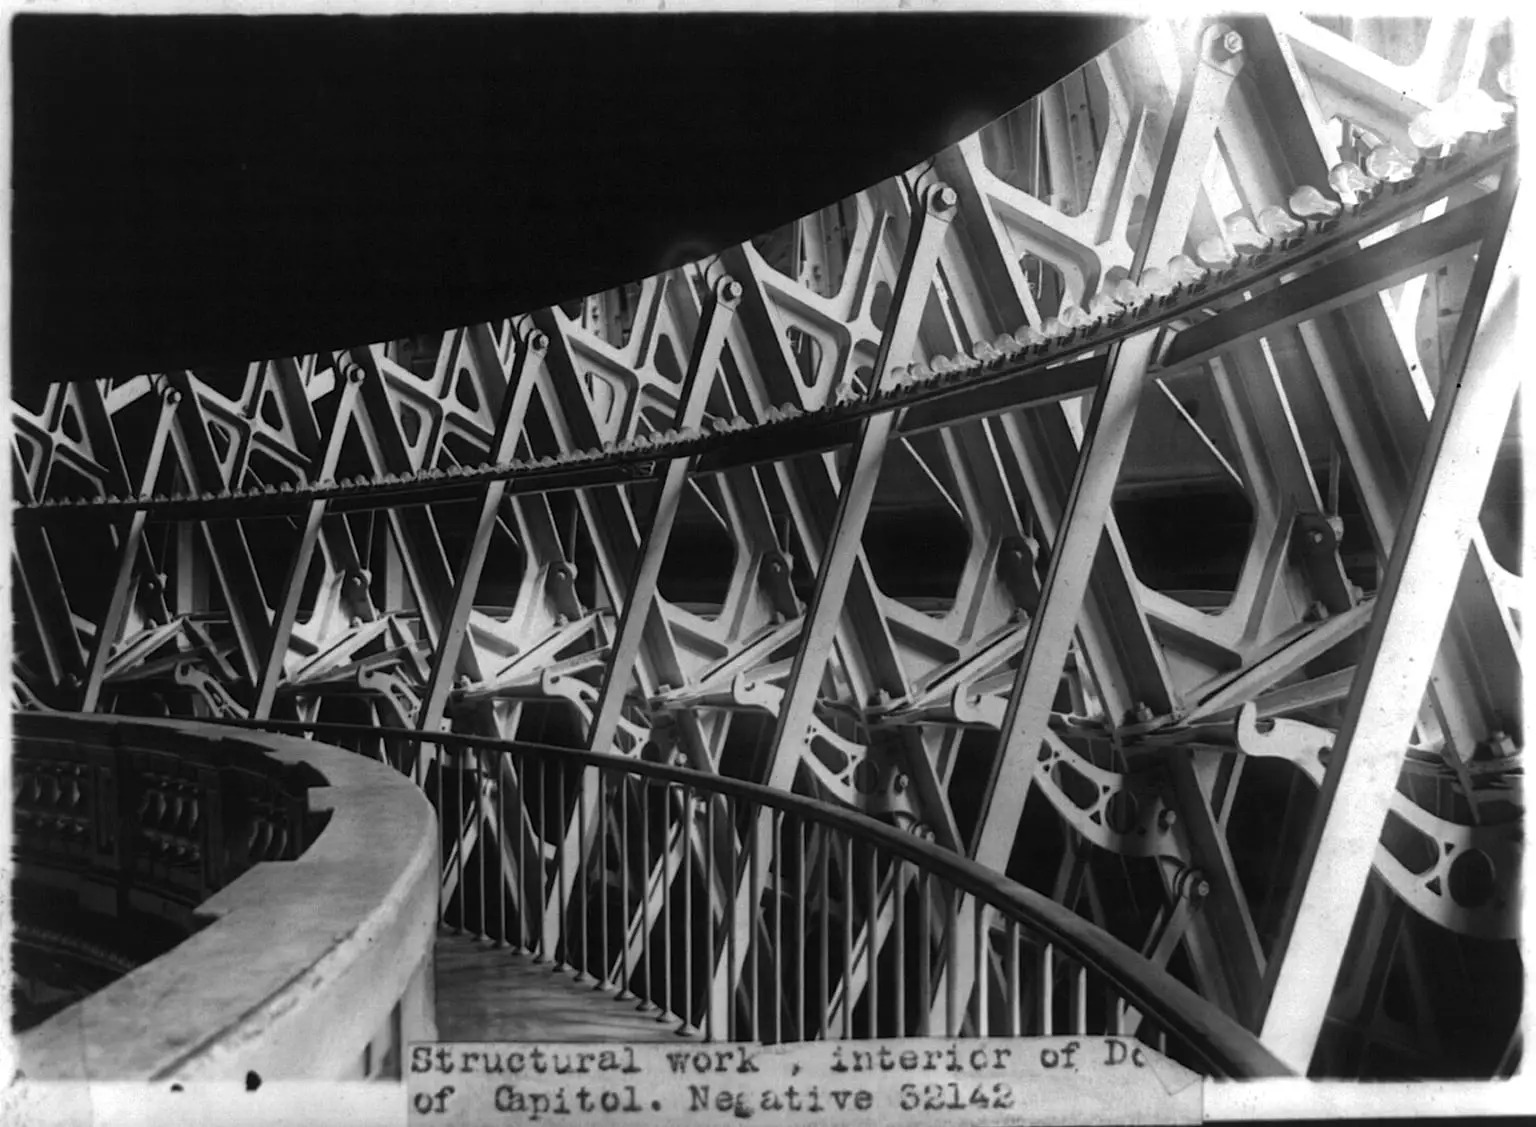 .S. Capitol interiors: detail of structural work of dome interior